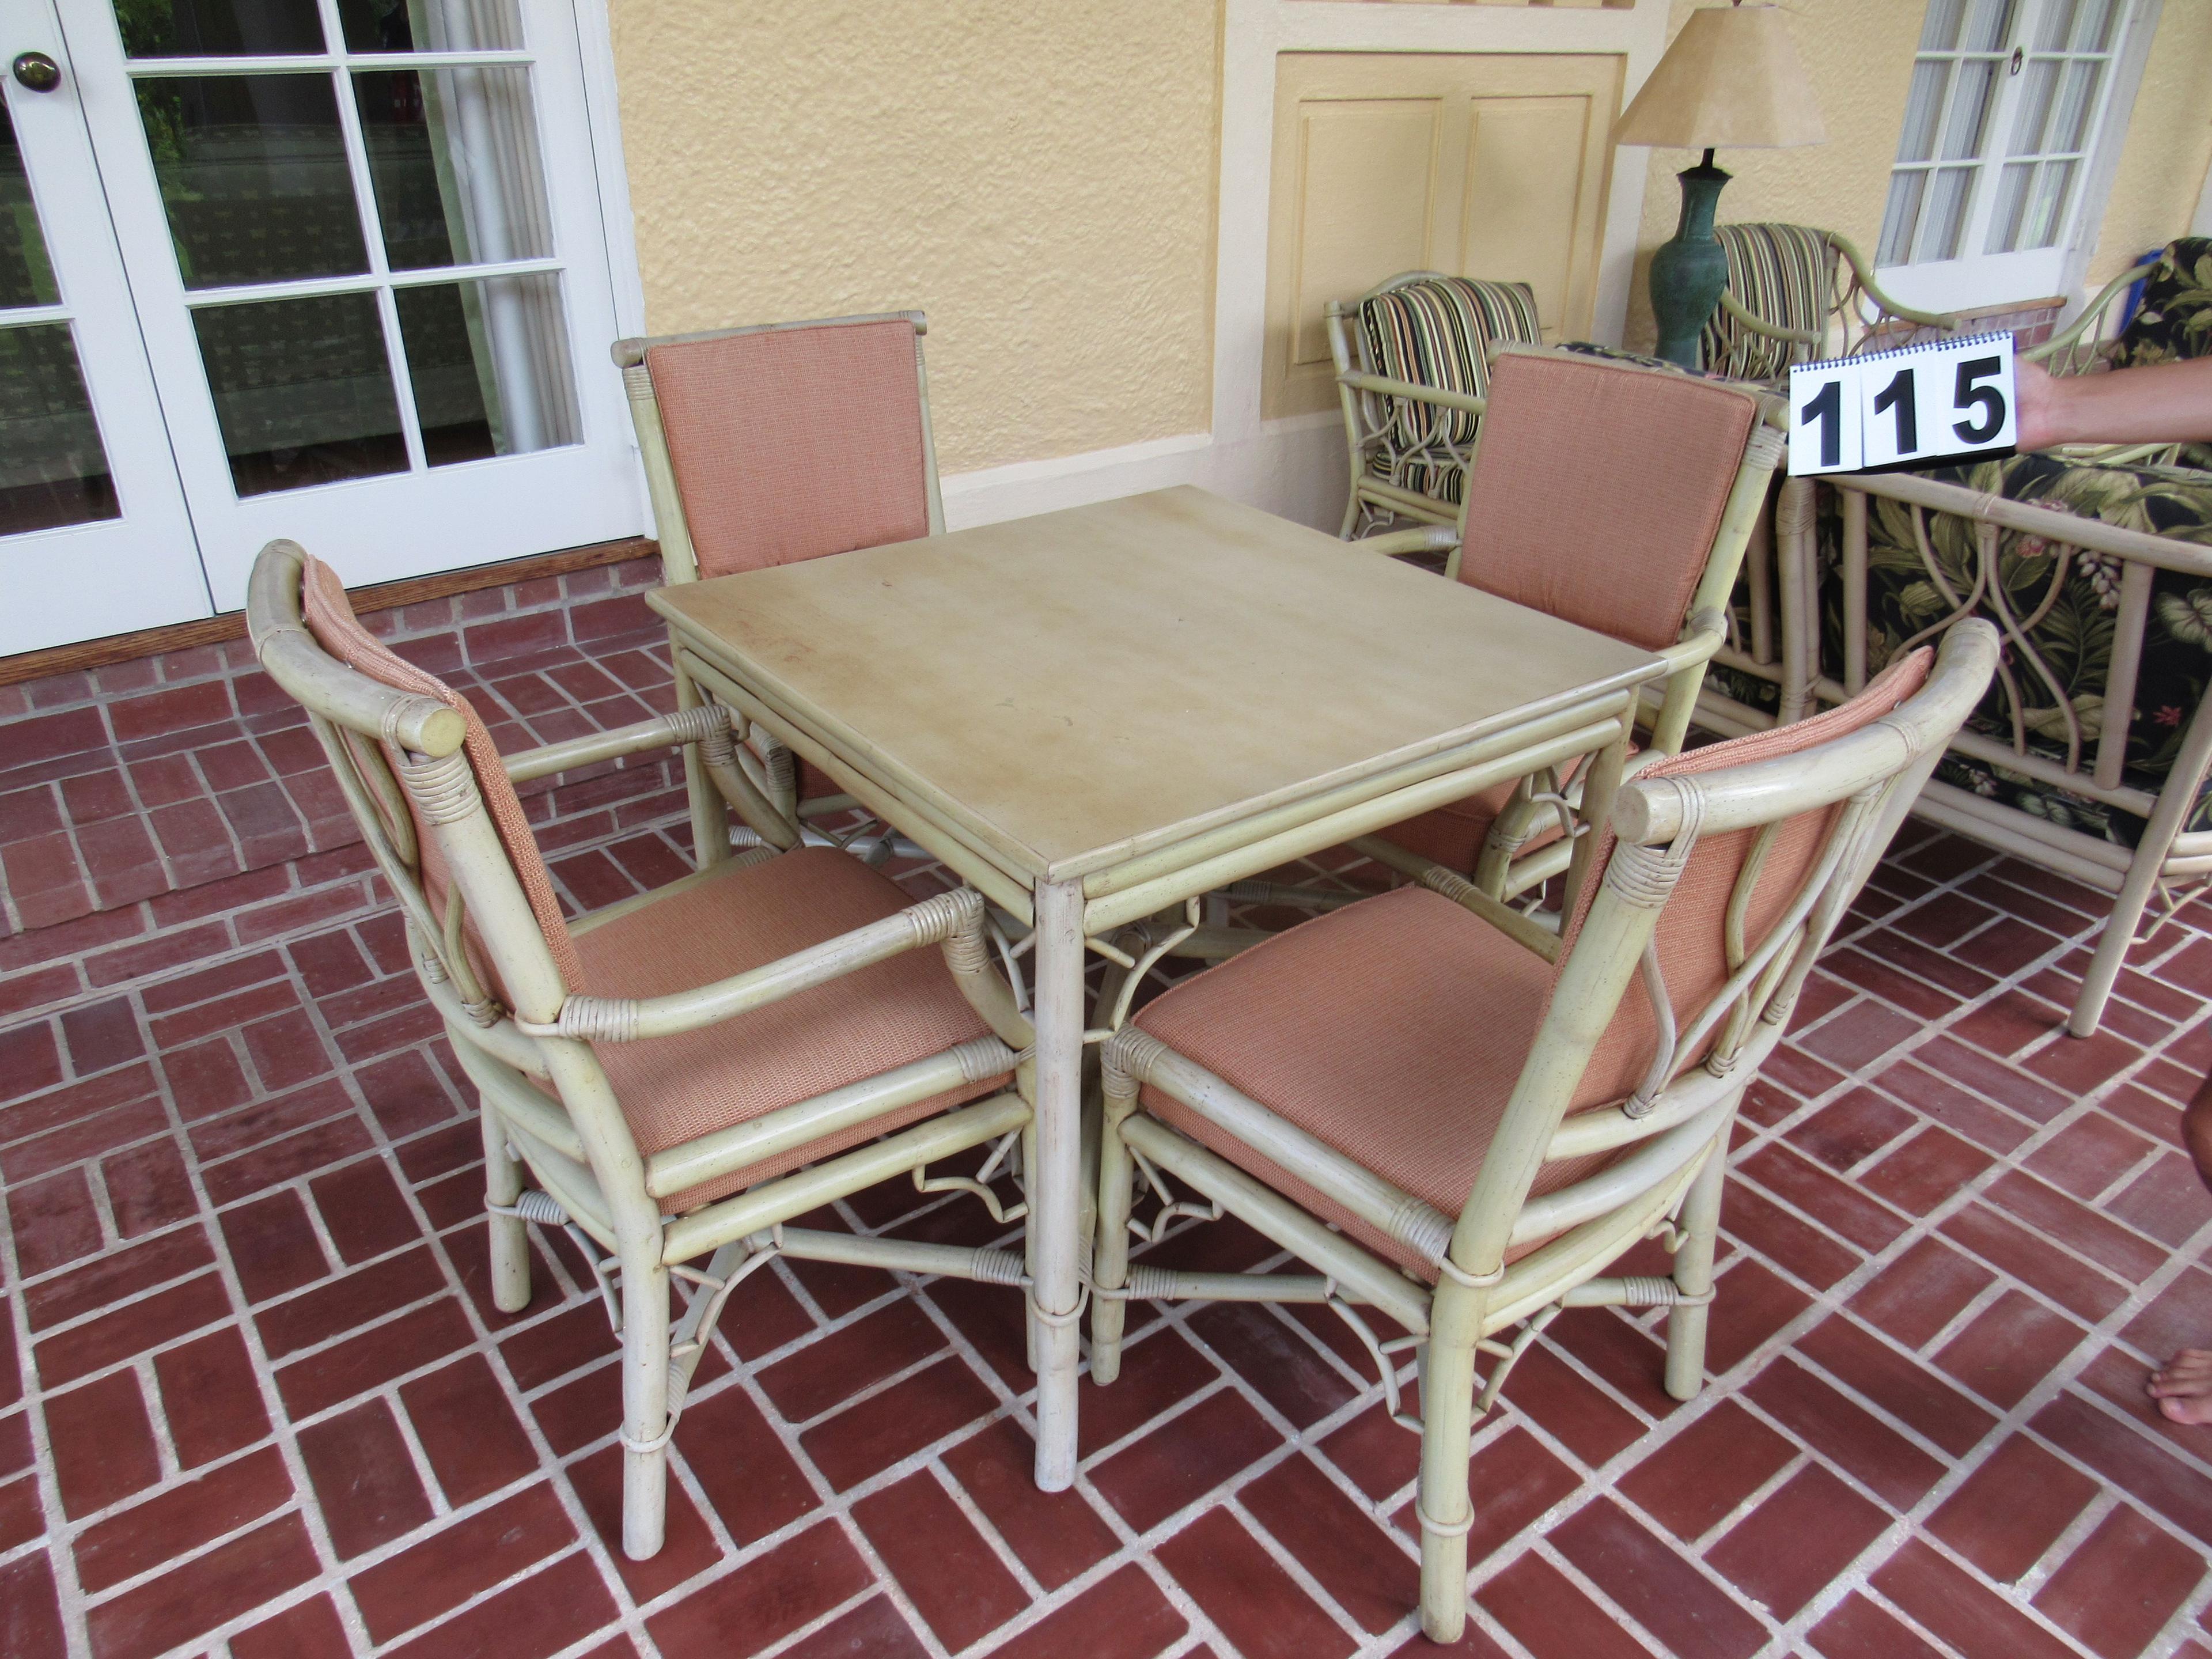 rattan dining set table with 4 chairs  (2) arm chairs and (2) straight chairs 32 x 32"" table top Th